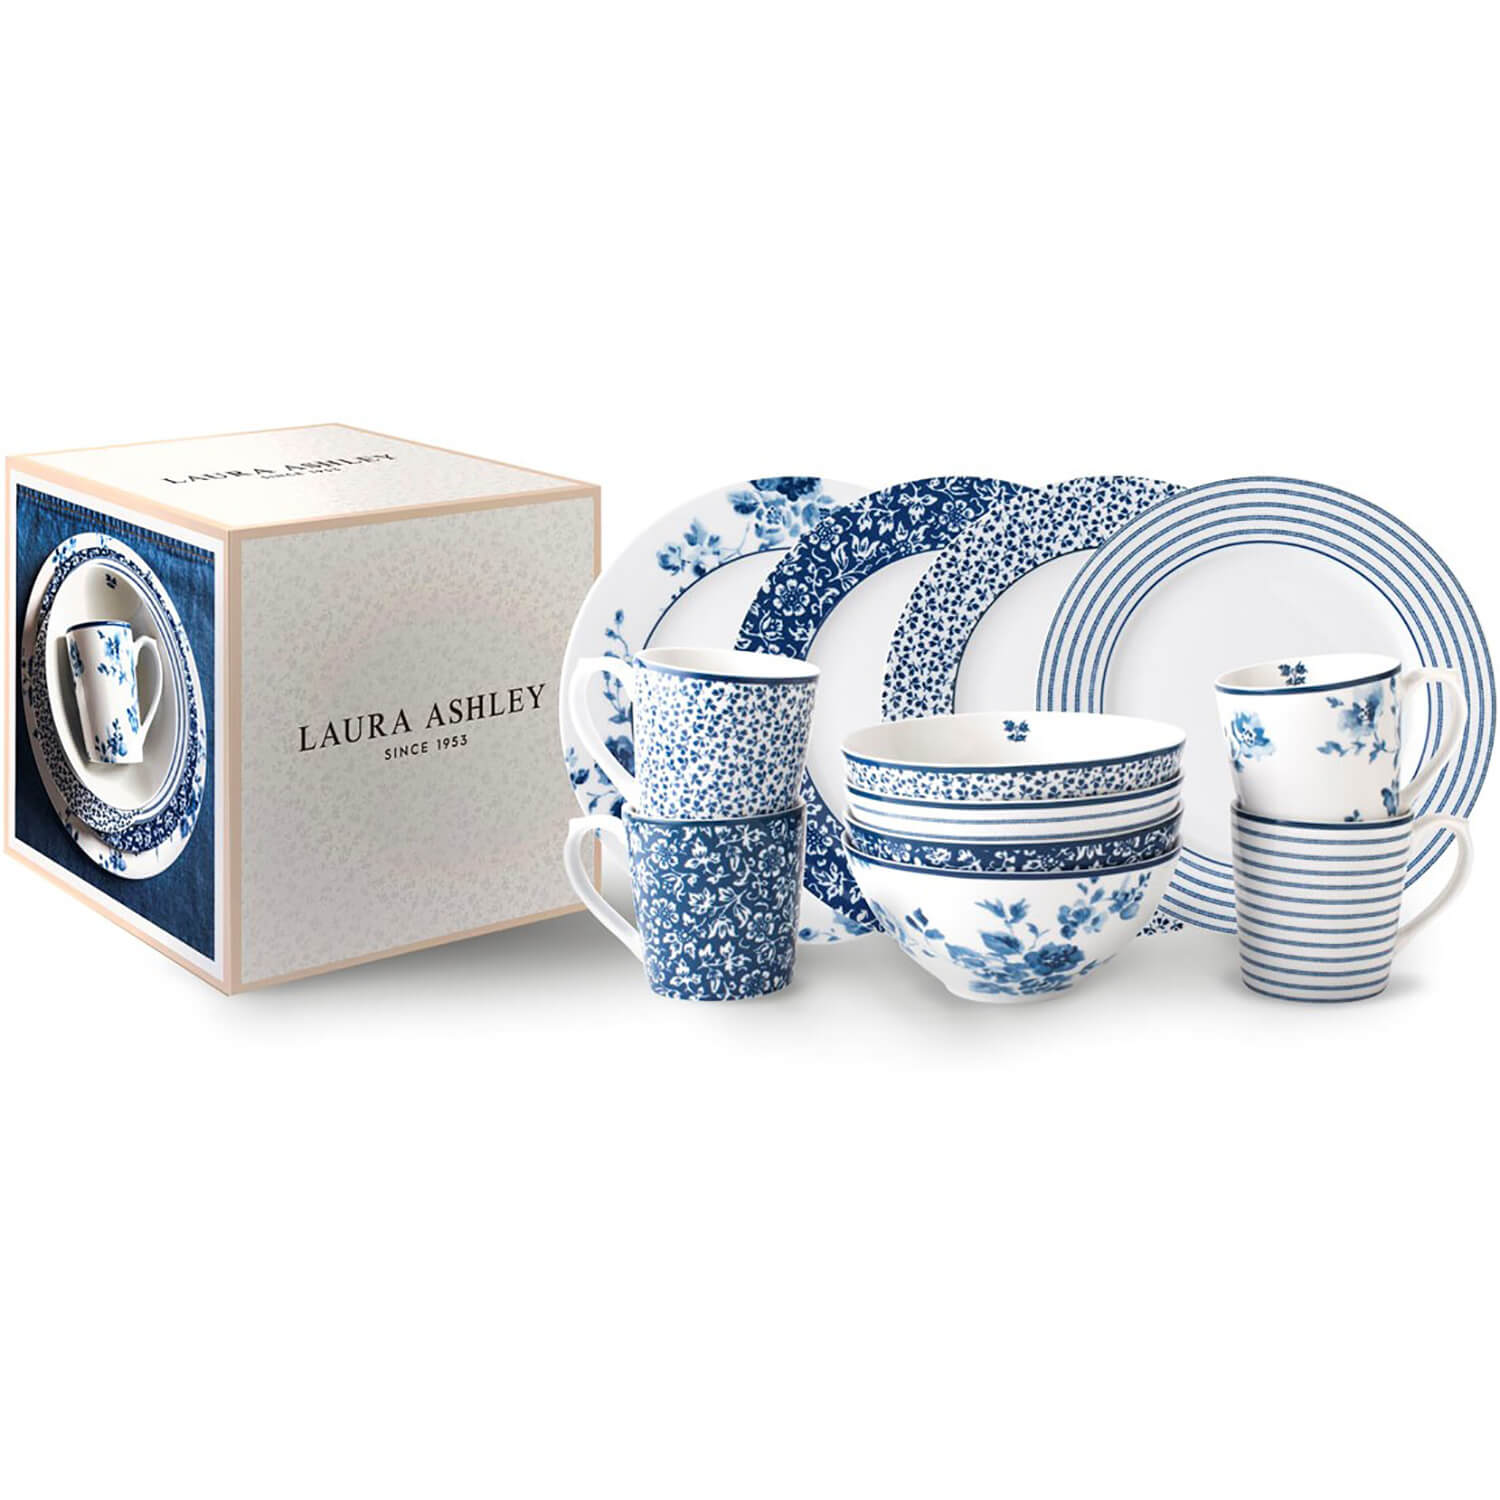 Laura Ashley Blueprint Collectables 12-Piece Breakfast Tableware Giftset 2 Shaws Department Stores